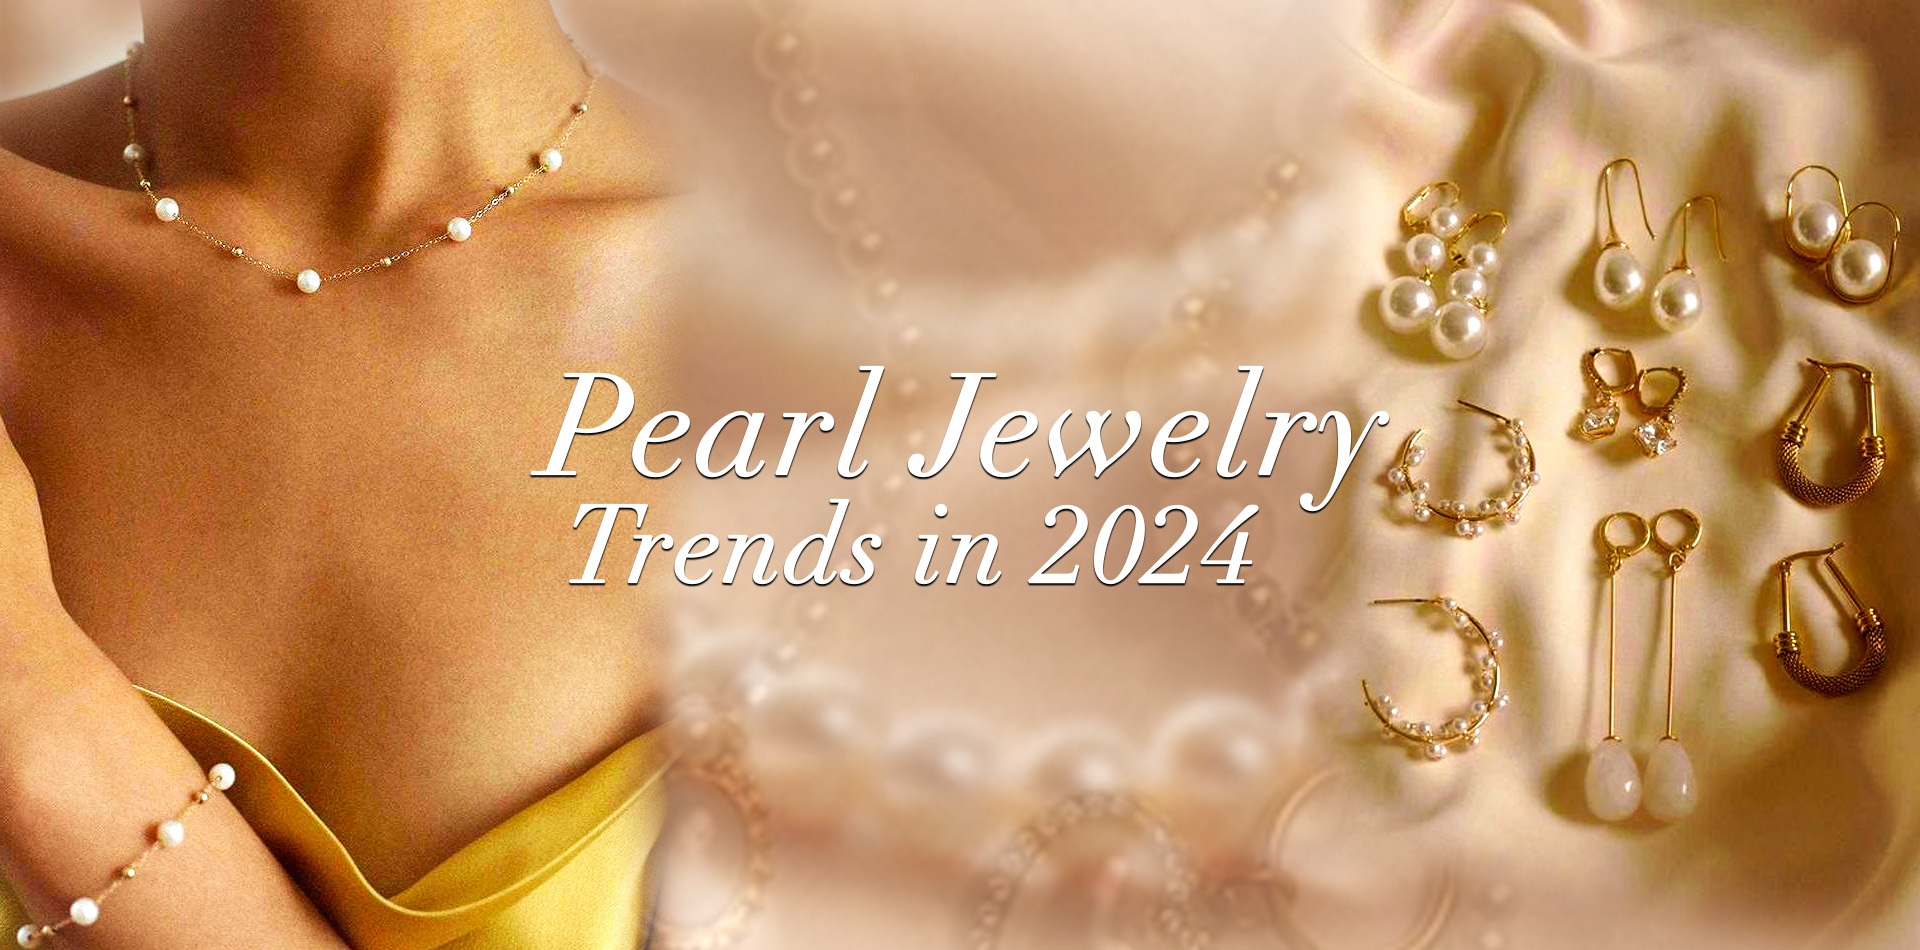 Pearl Jewelry Trends in 2024